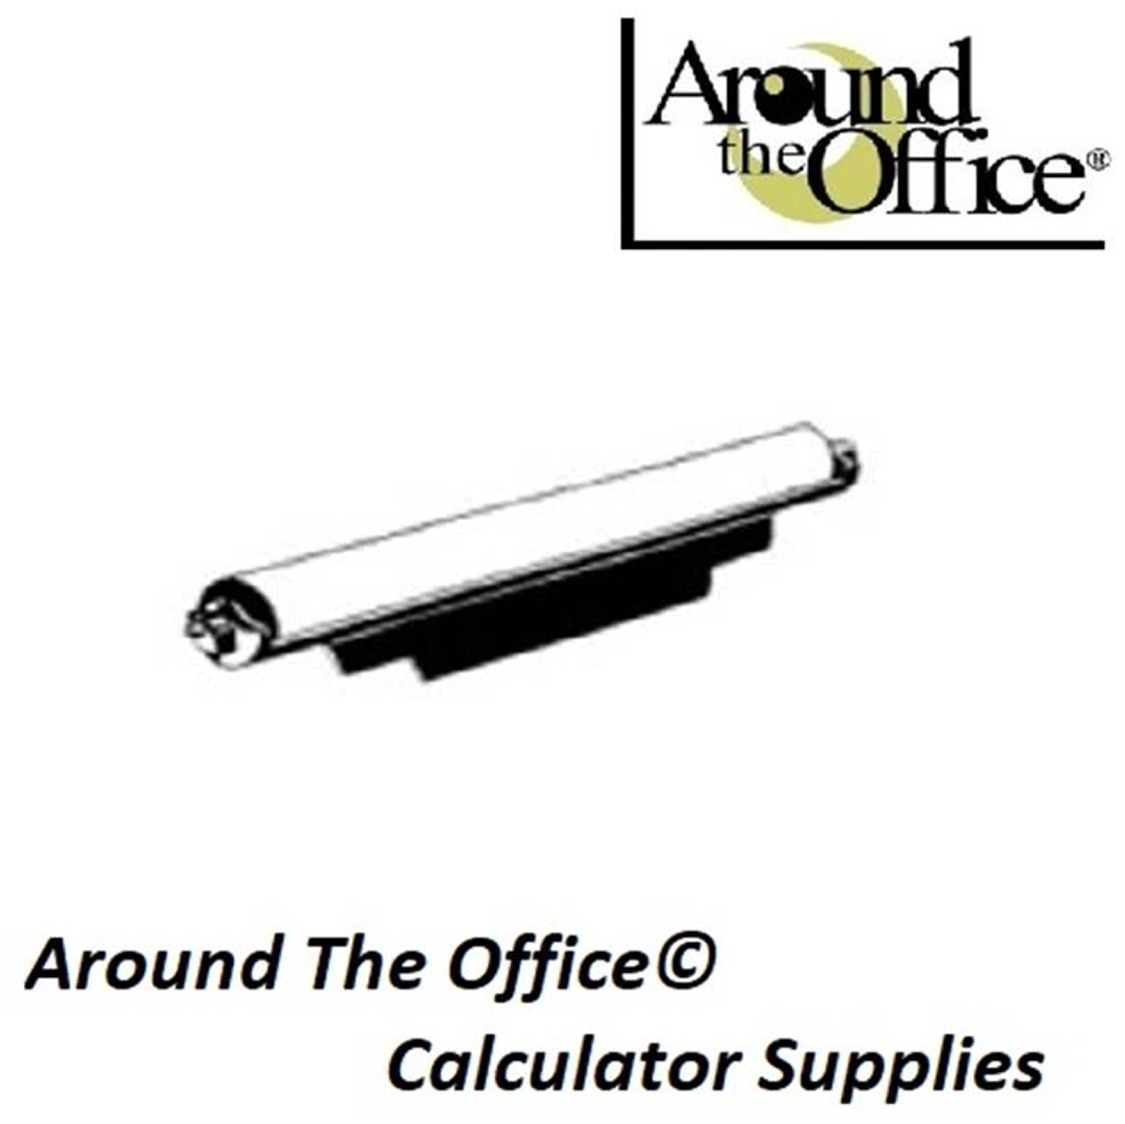 OLIVETTI Model IR-72 Compatible CAlculator IR-4 (IR-72) Ink Roll by Around The Office - image 1 of 1